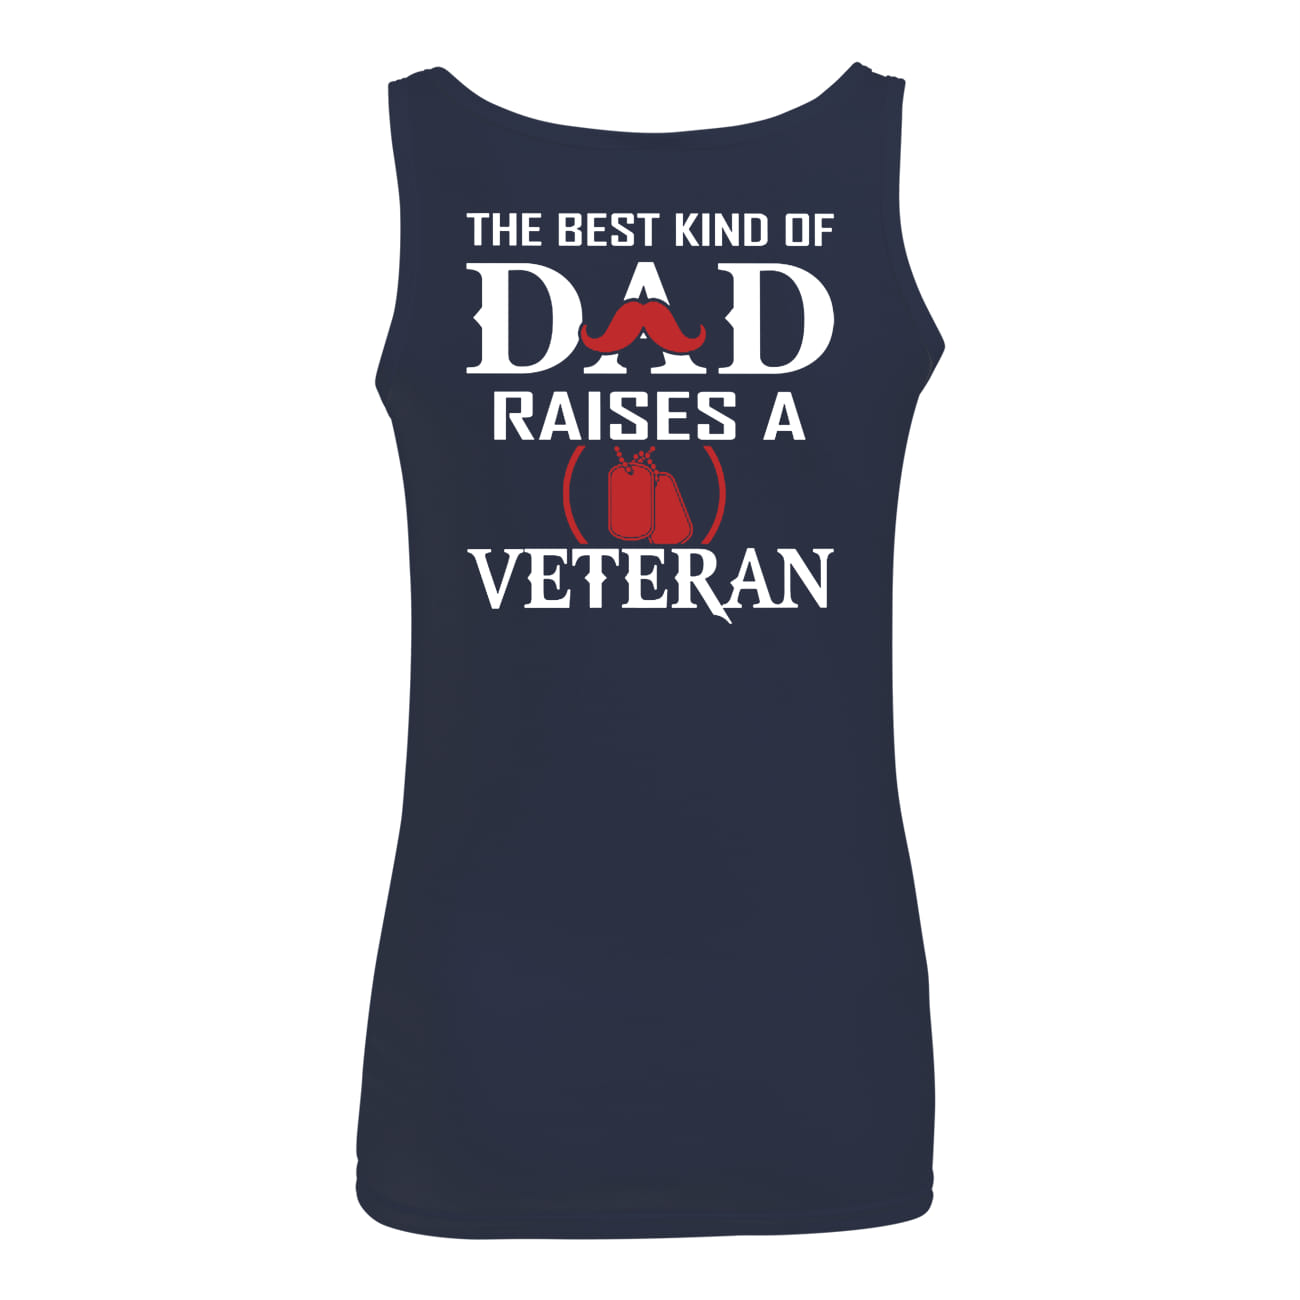 The best kind of dad raise a veteran tank top